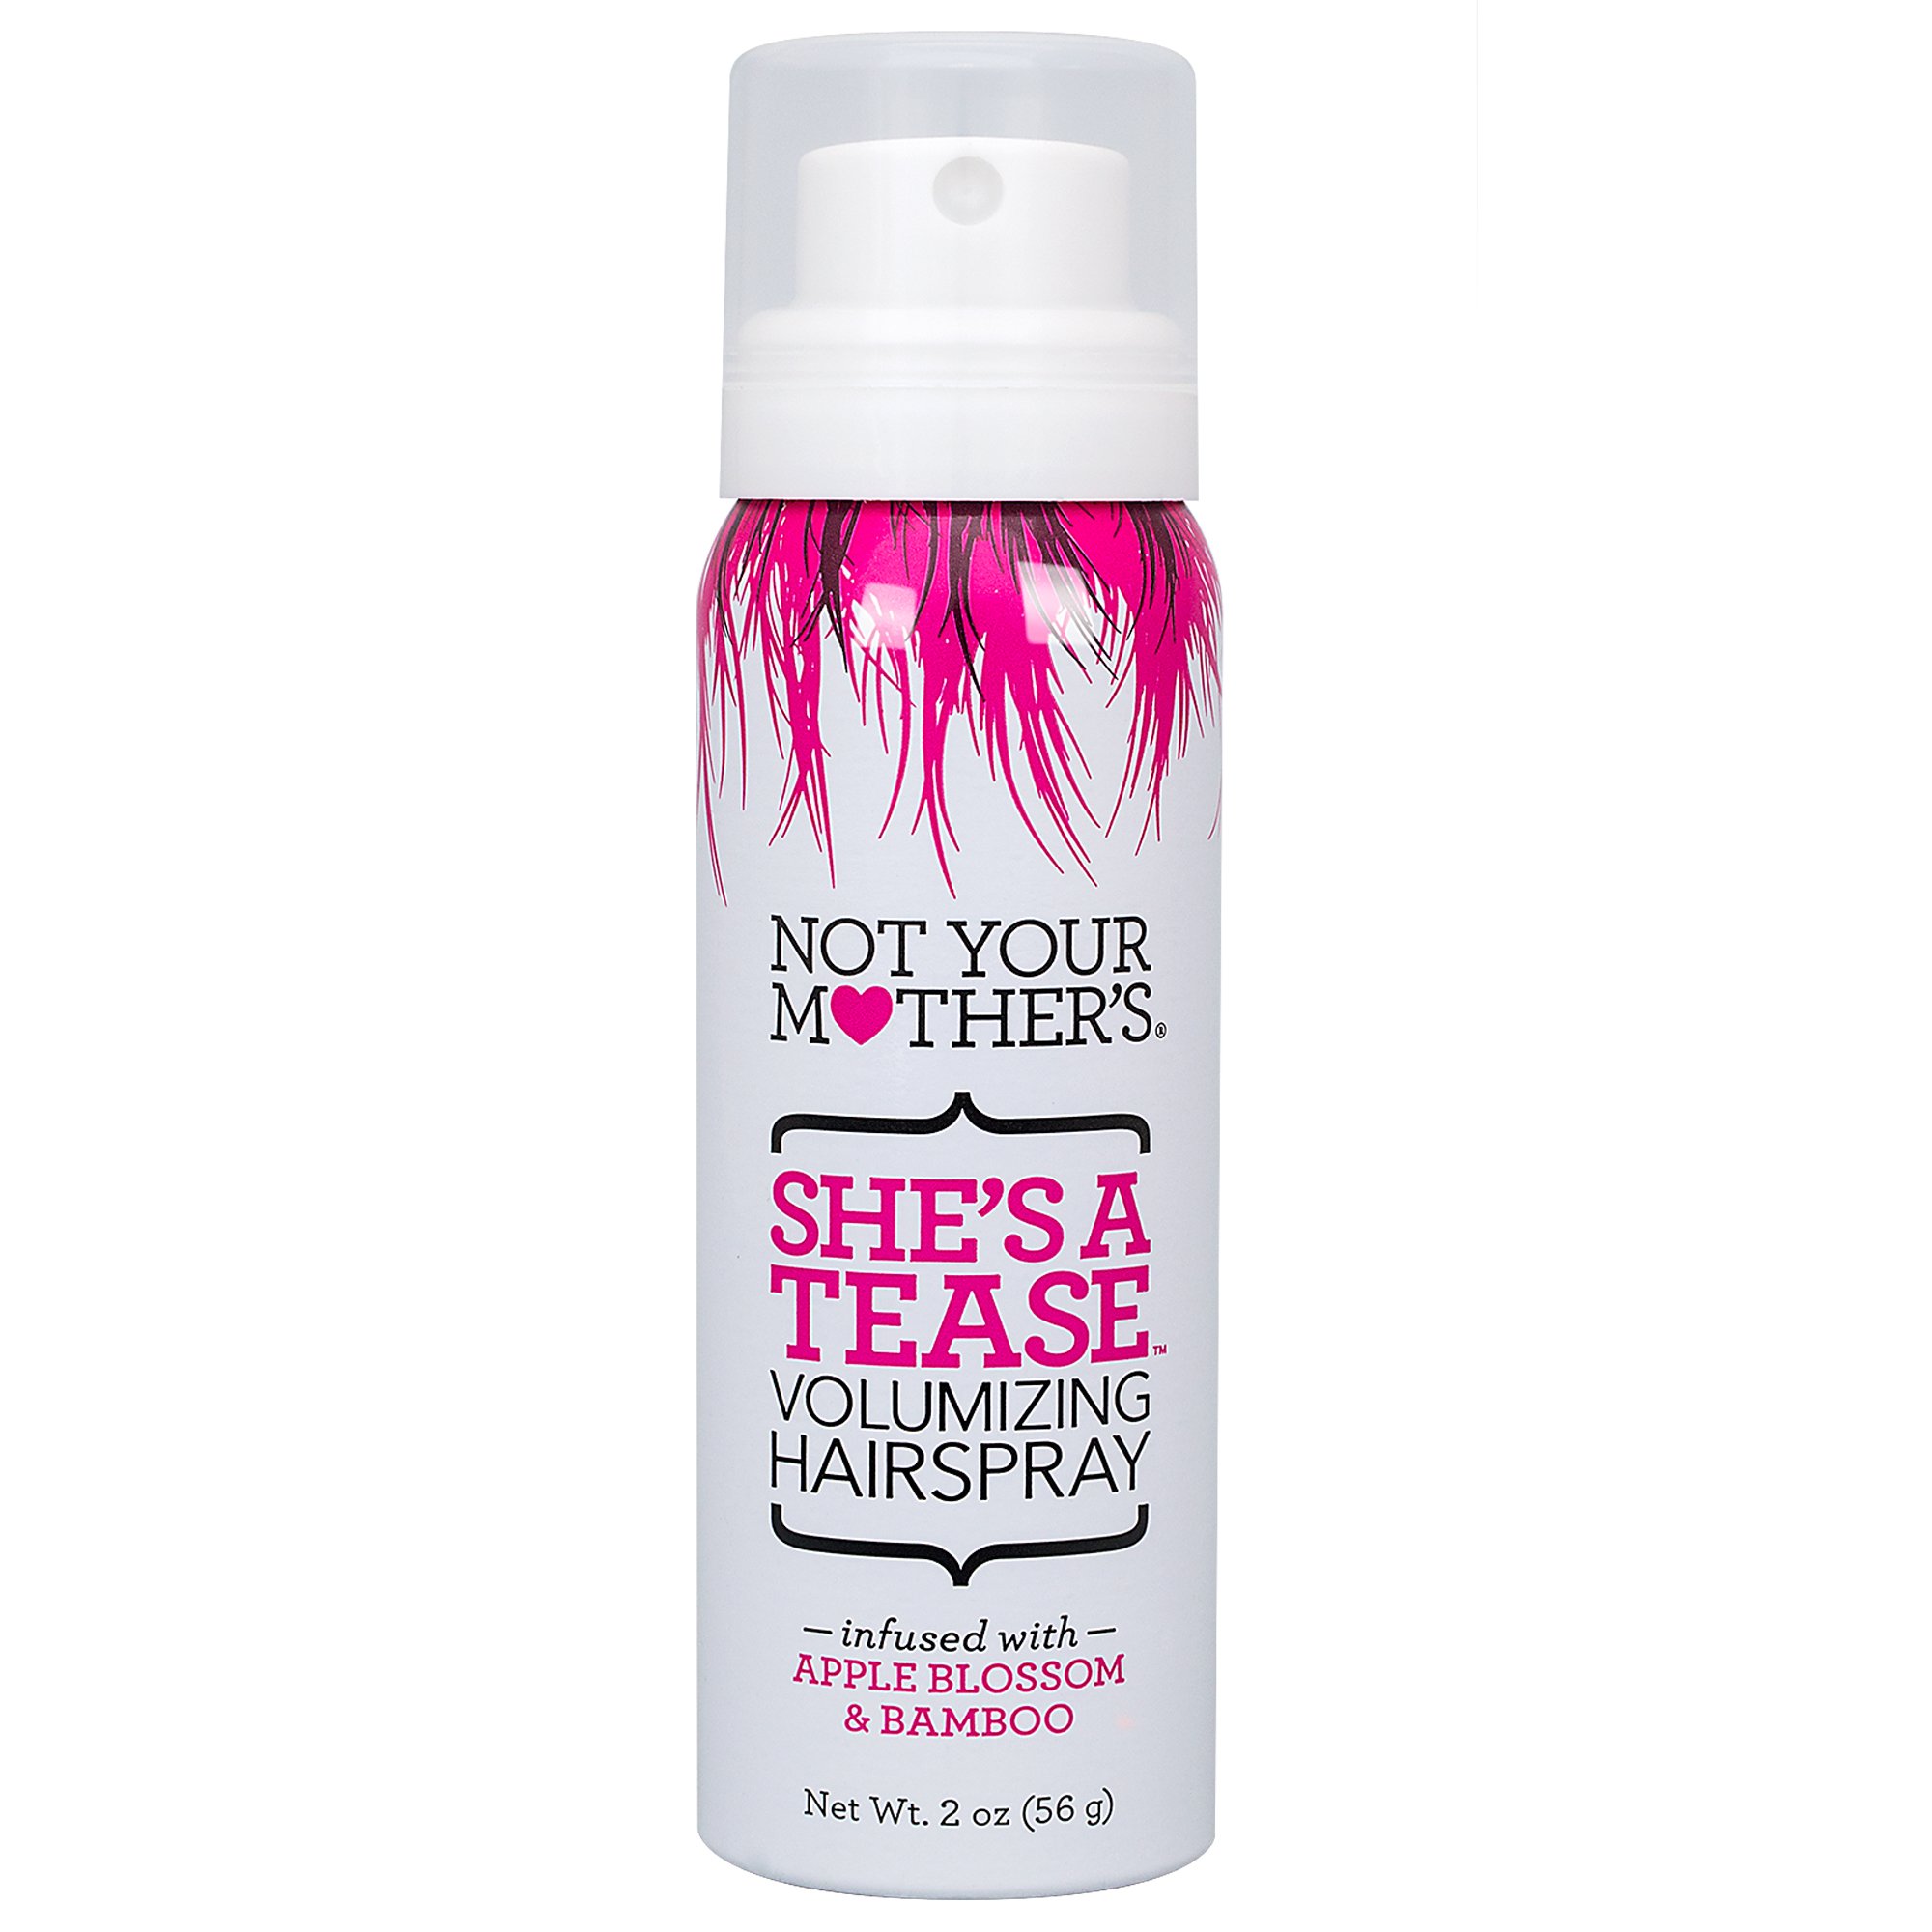 not your mother's travel size hairspray